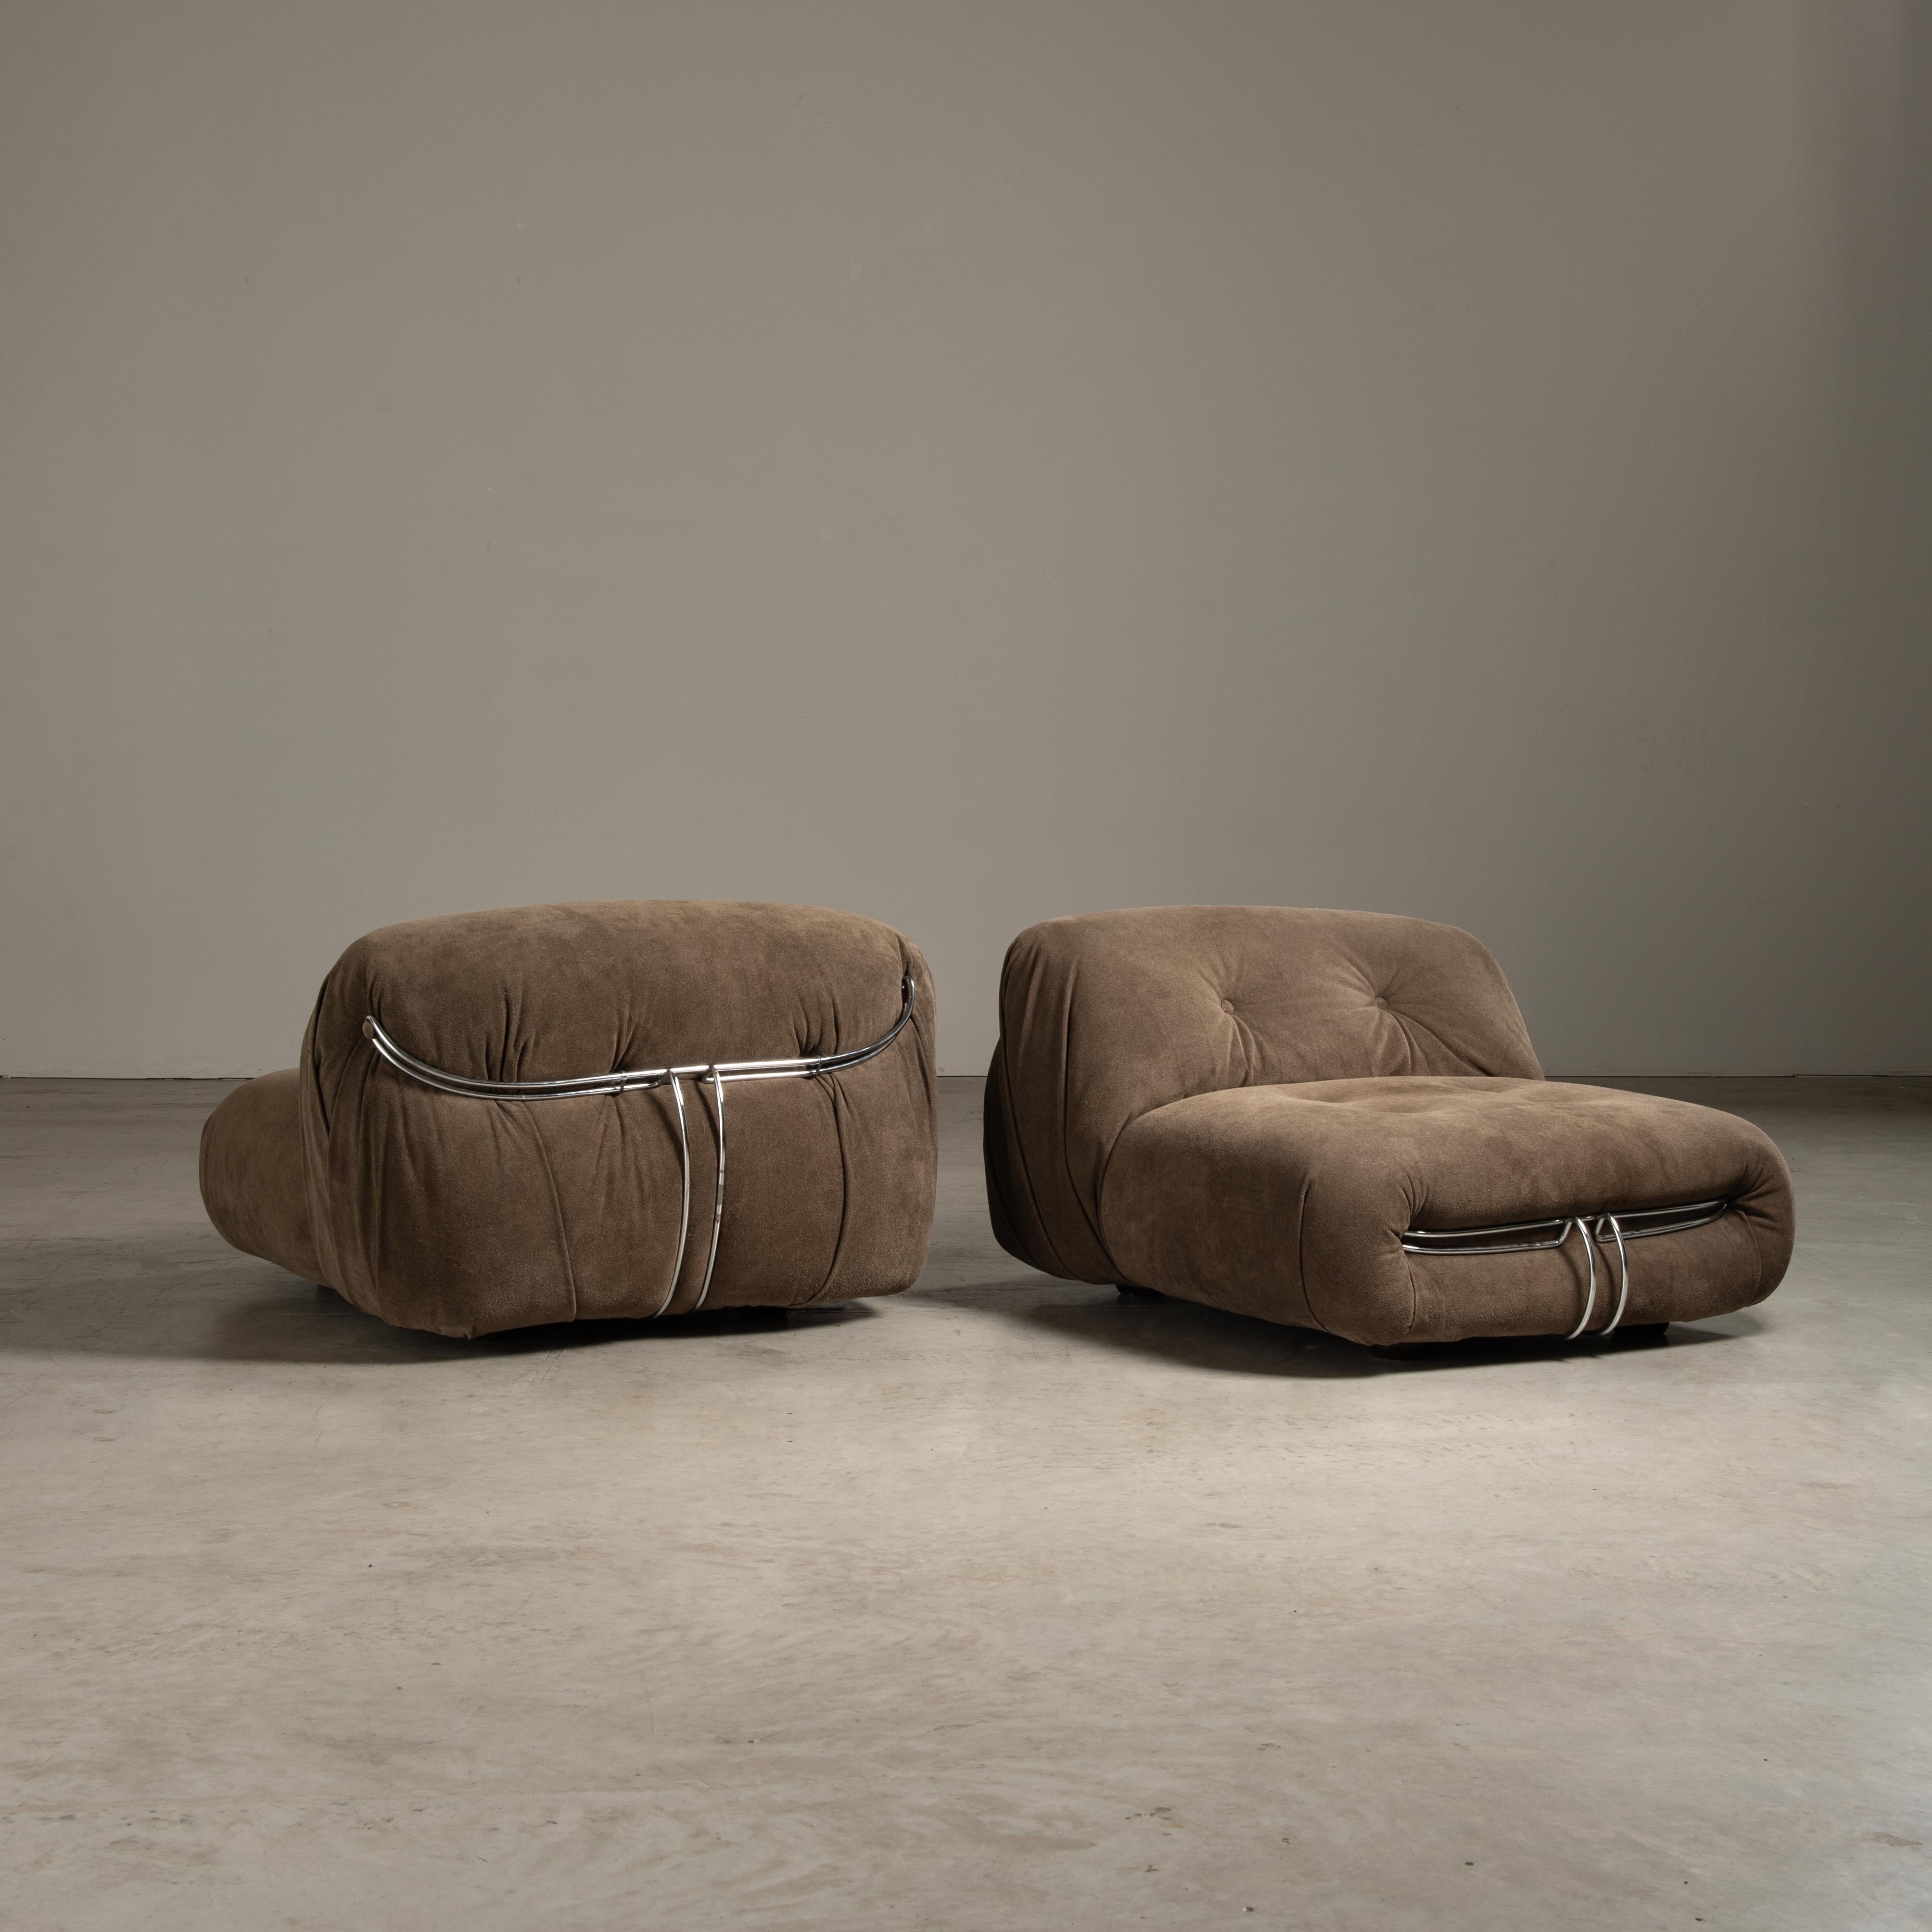 This Soriana lounge chair is characterized by its substantial, bulbous form, enveloping the sitter in a voluminous, cushioned embrace. The use of soft, suede-like fabric in a rich, earthy brown tone suggests a tactile experience, inviting touch and